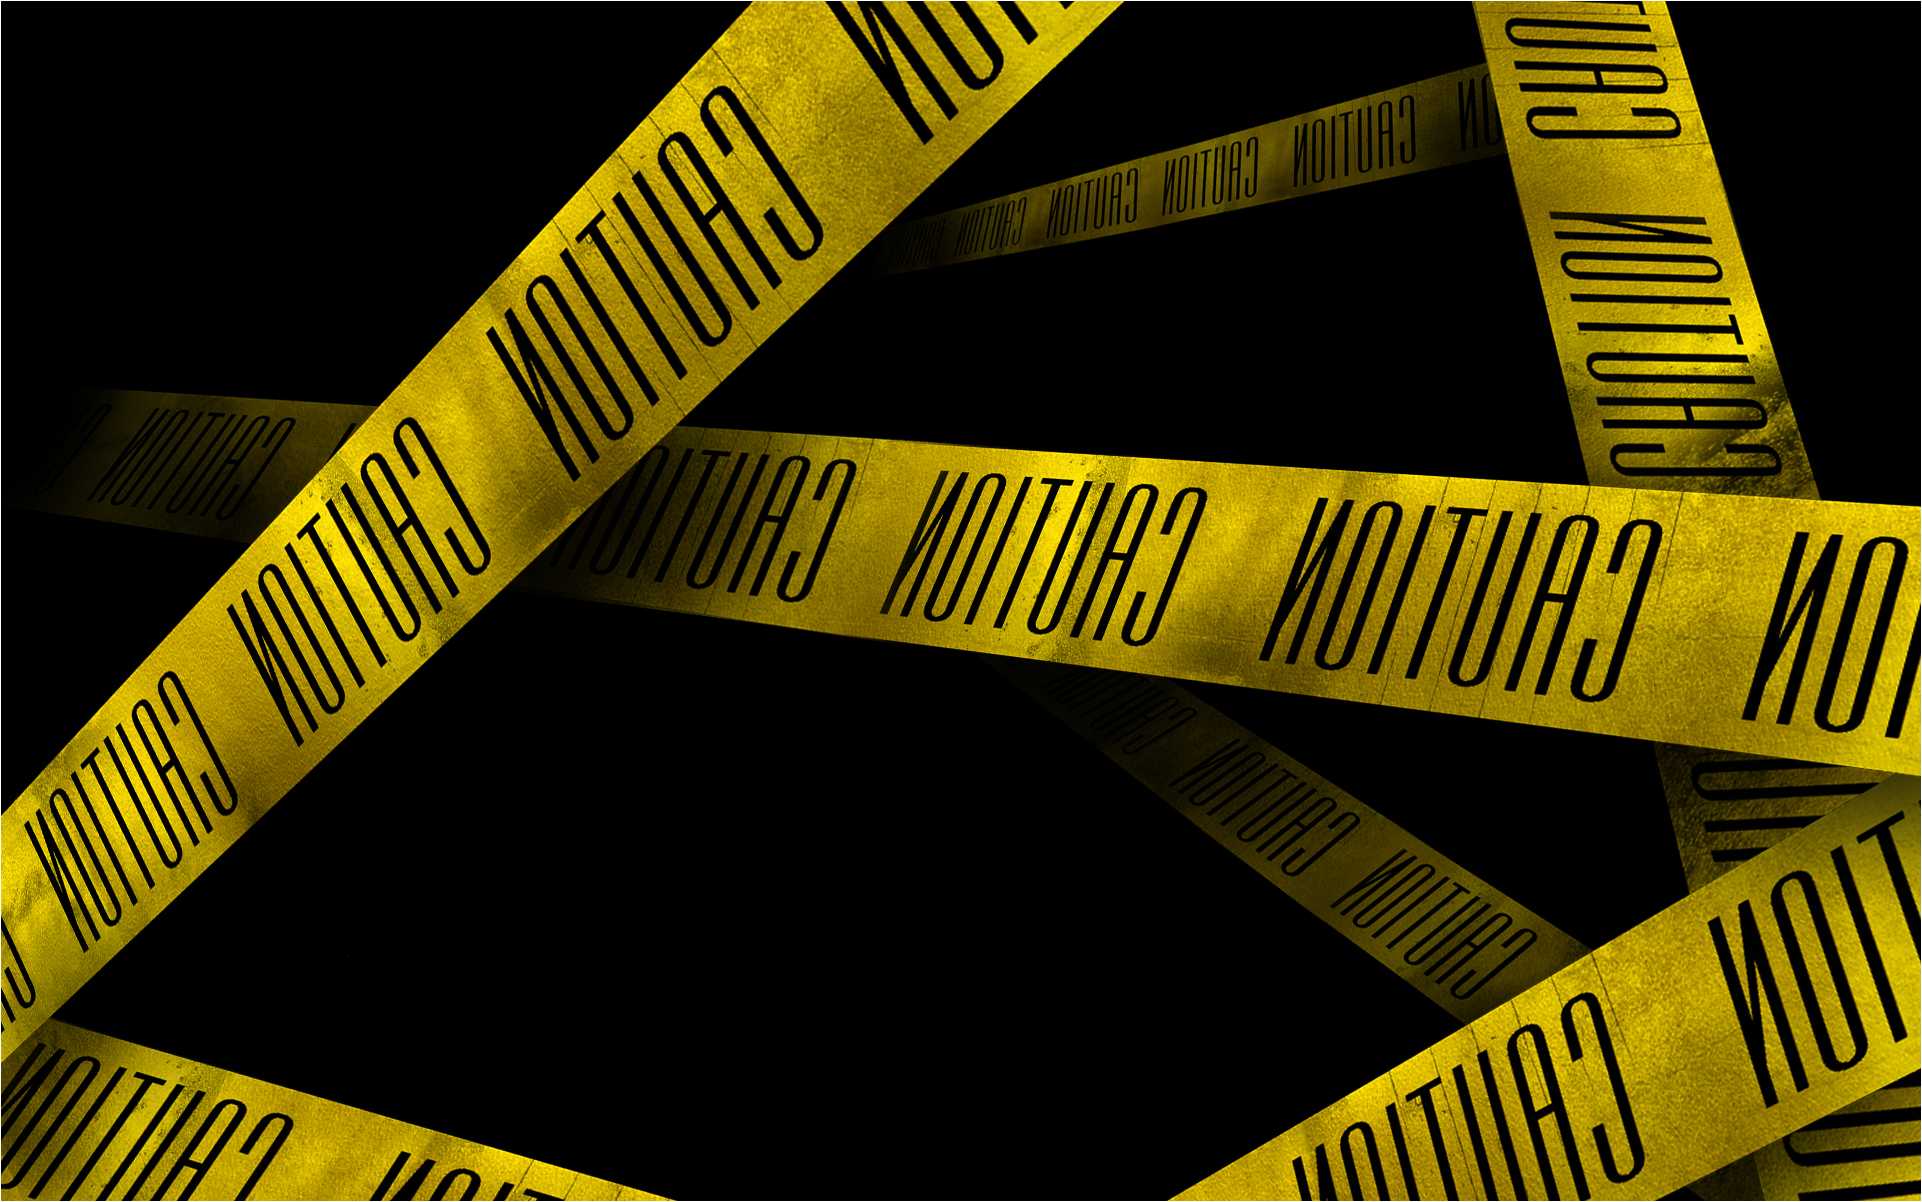 Caution Tape Wallpapers Wallpaper Cave